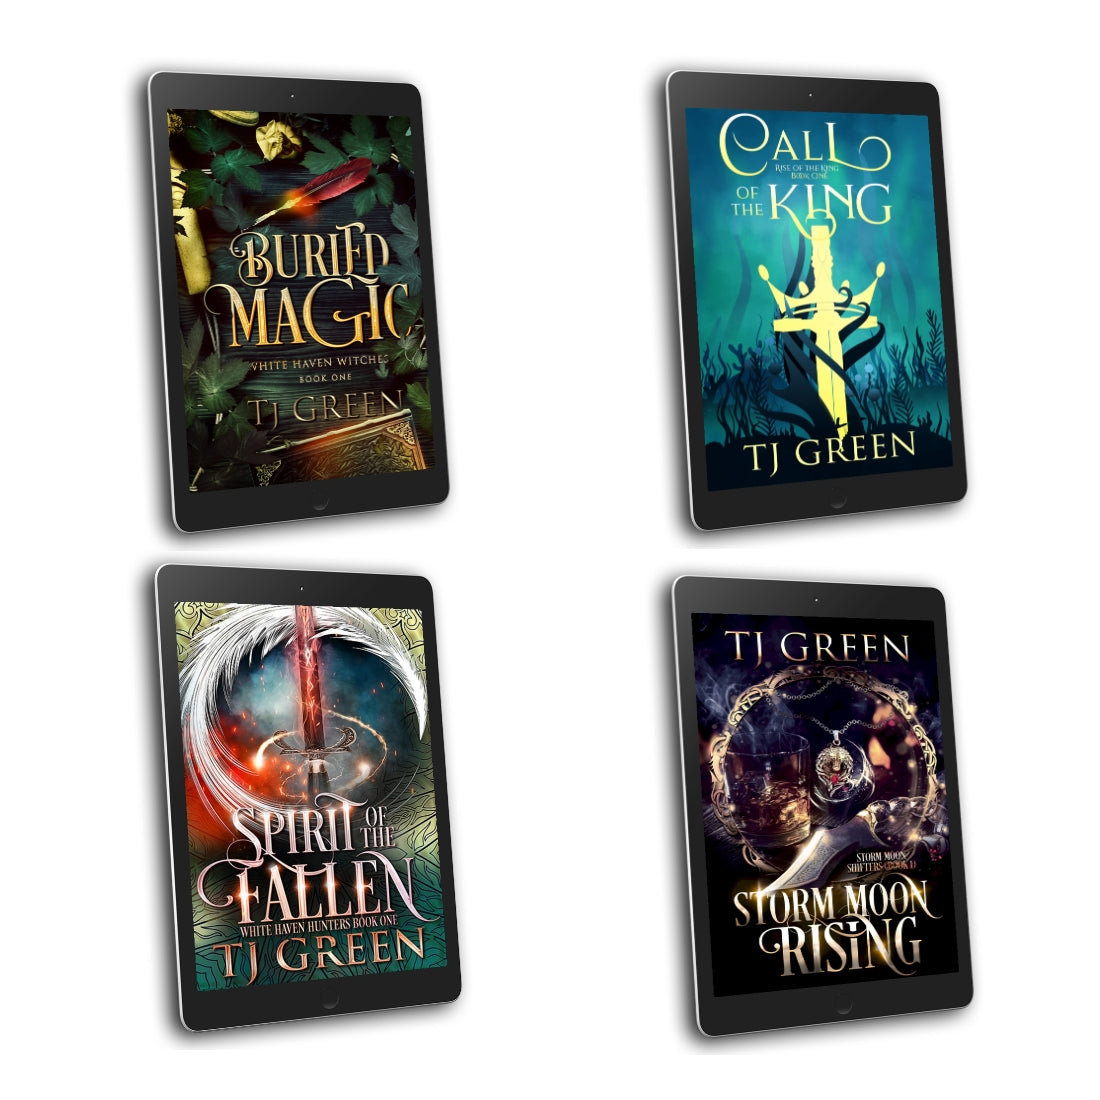 Four series starters. Paranormal mysteries, urban fantasy, YA Arthurian fantasy, Shifters, magic, action-packed books